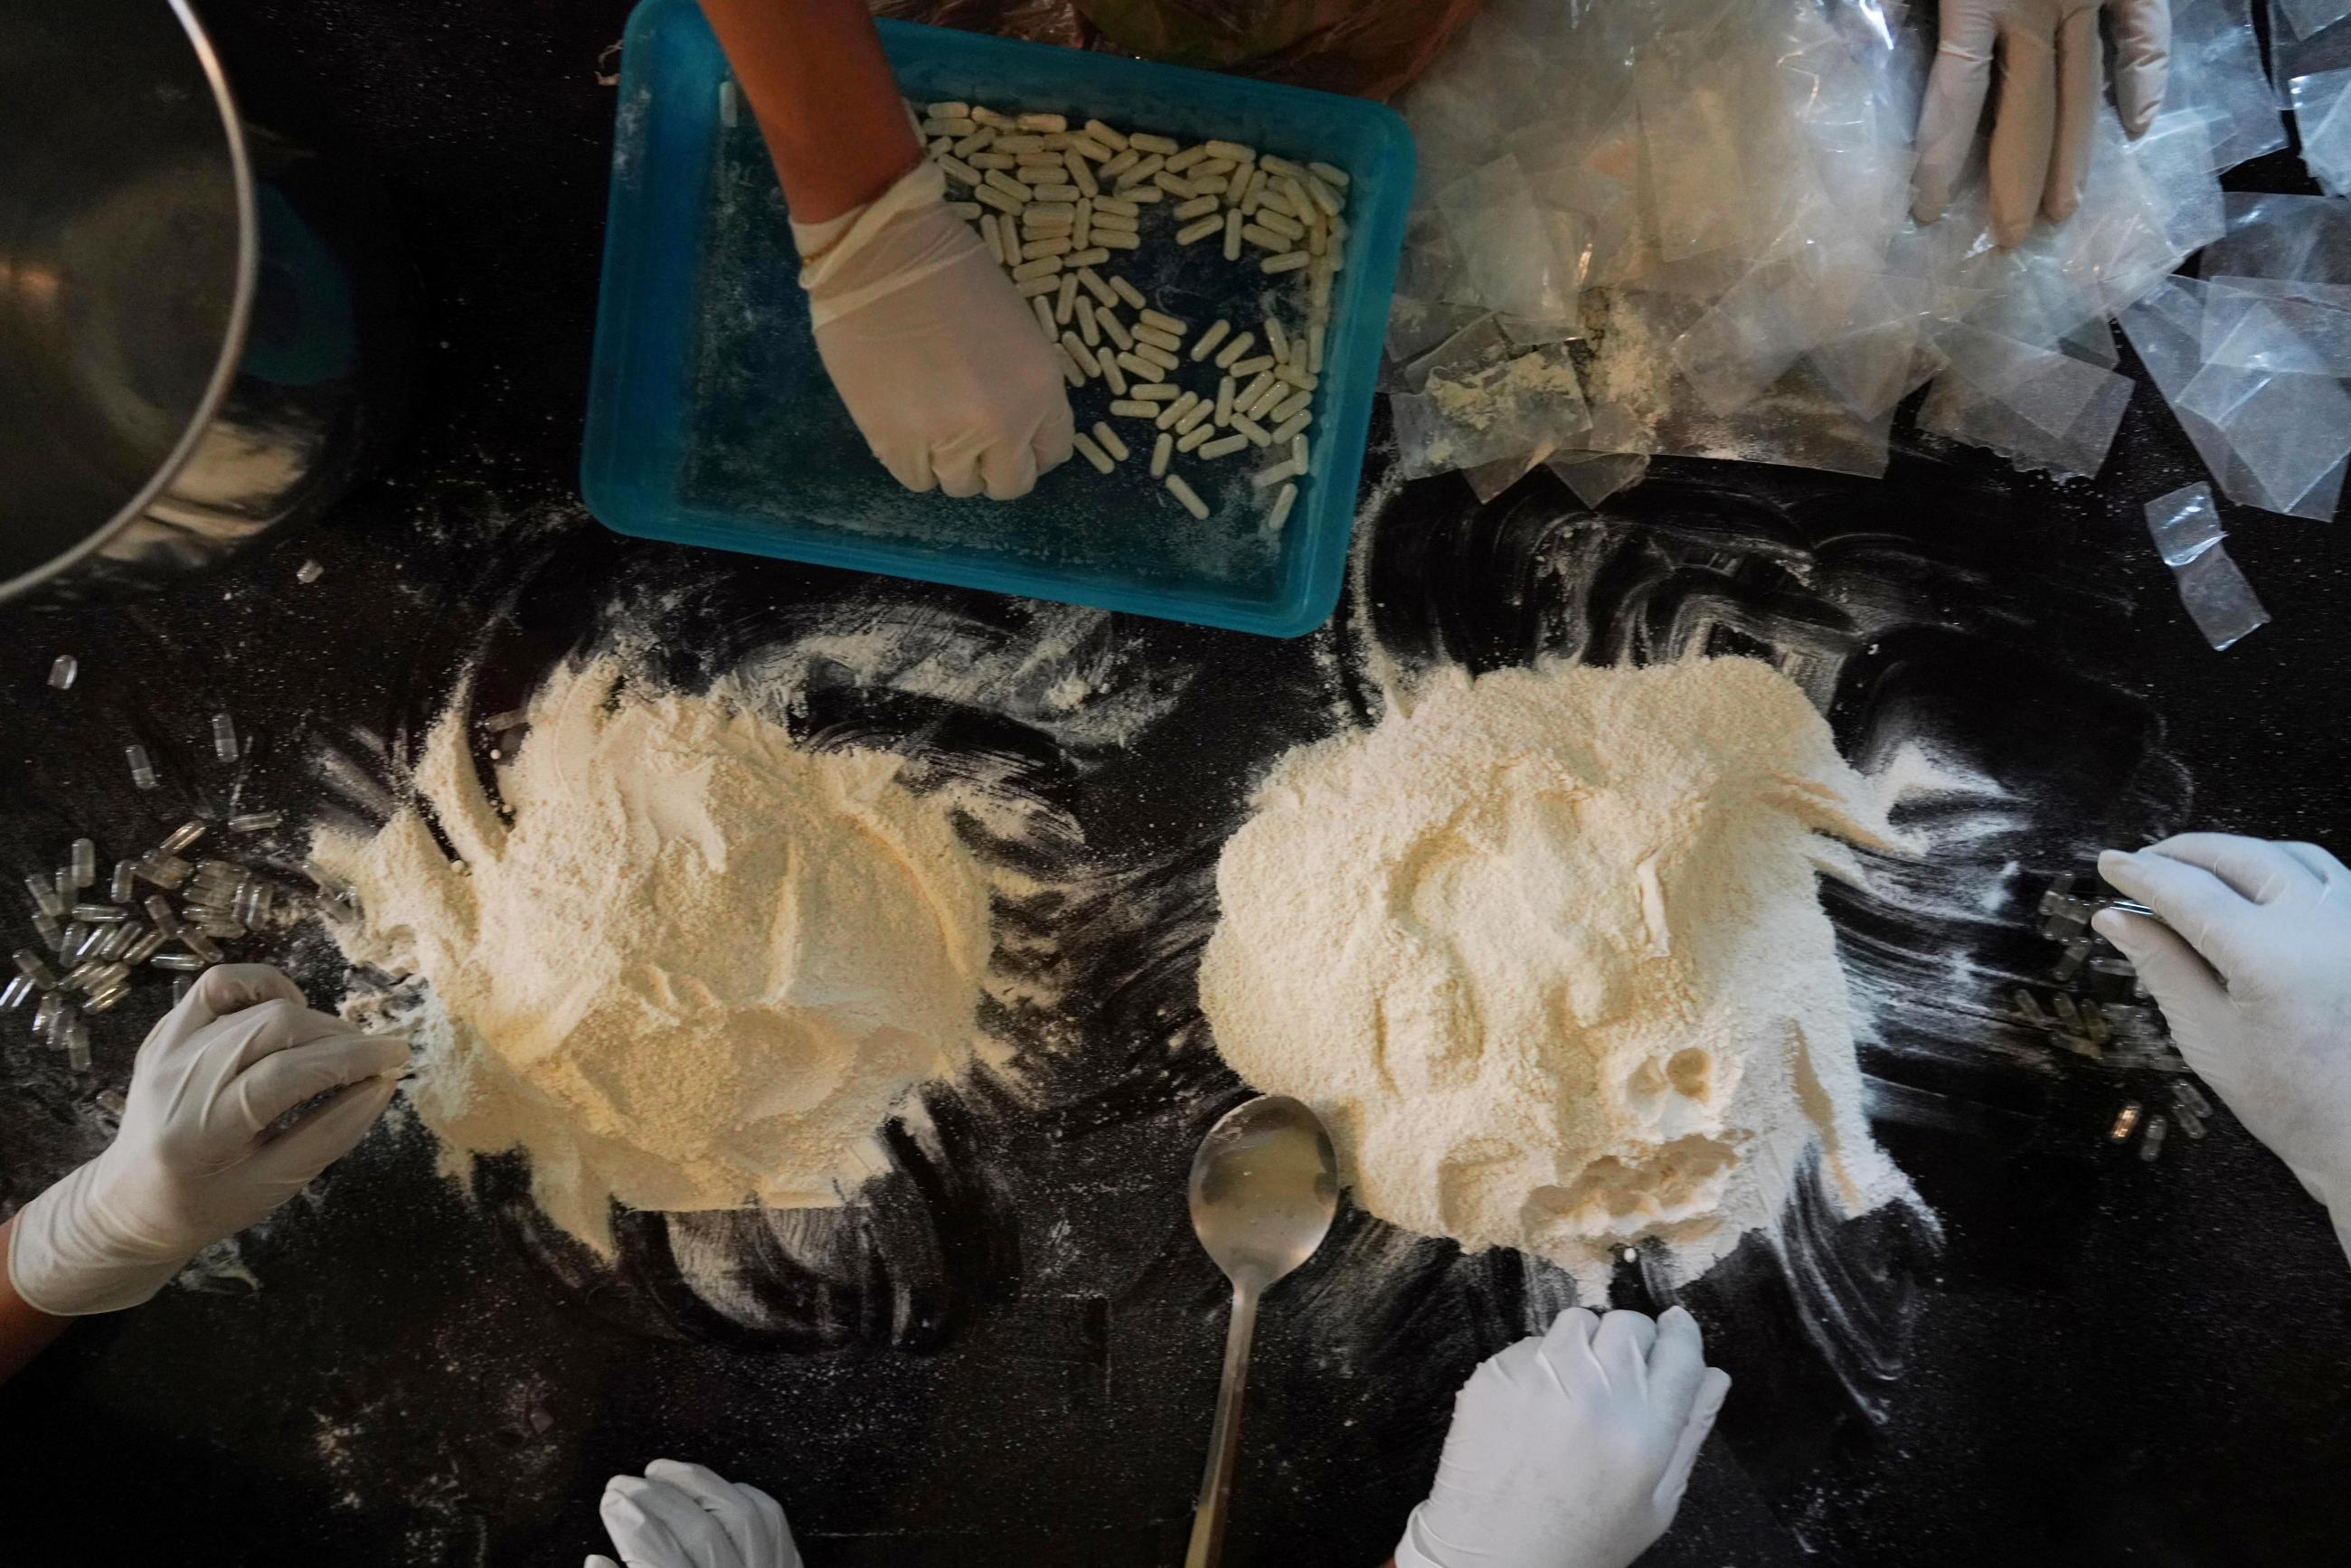 Members of the Sinaloa Cartel prepare capsules with methamphetamine in a safe house in Culiacan, Mexico, April 4, 2022.